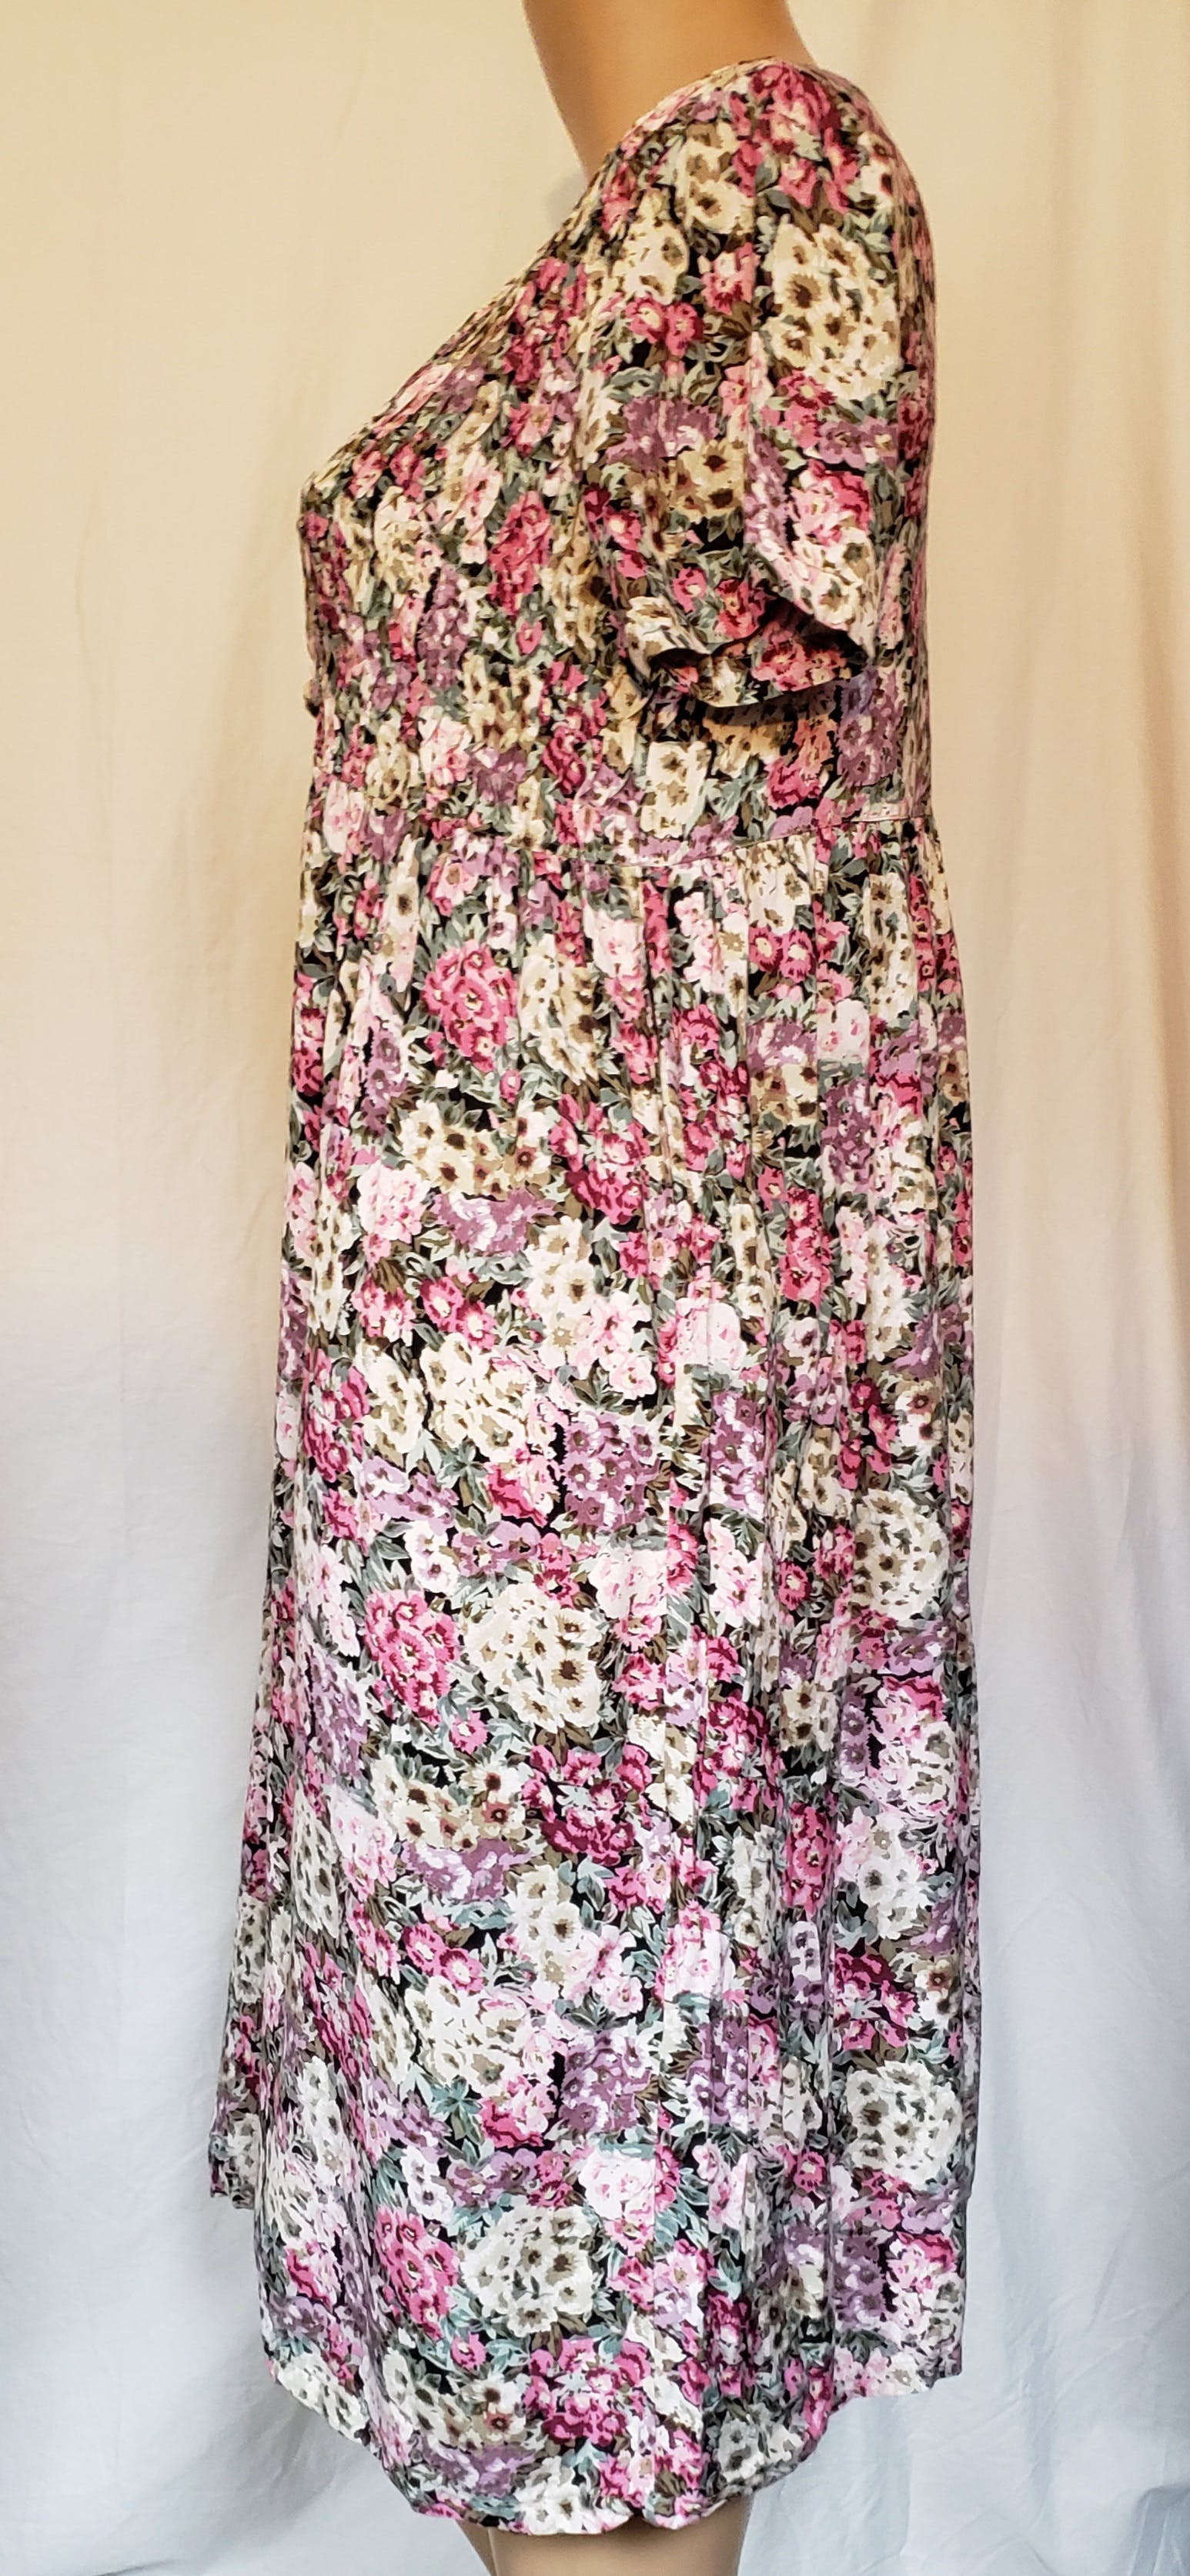 Vintage Oversized Floral Print Dress by Bryn Connelly | Shop THRILLING